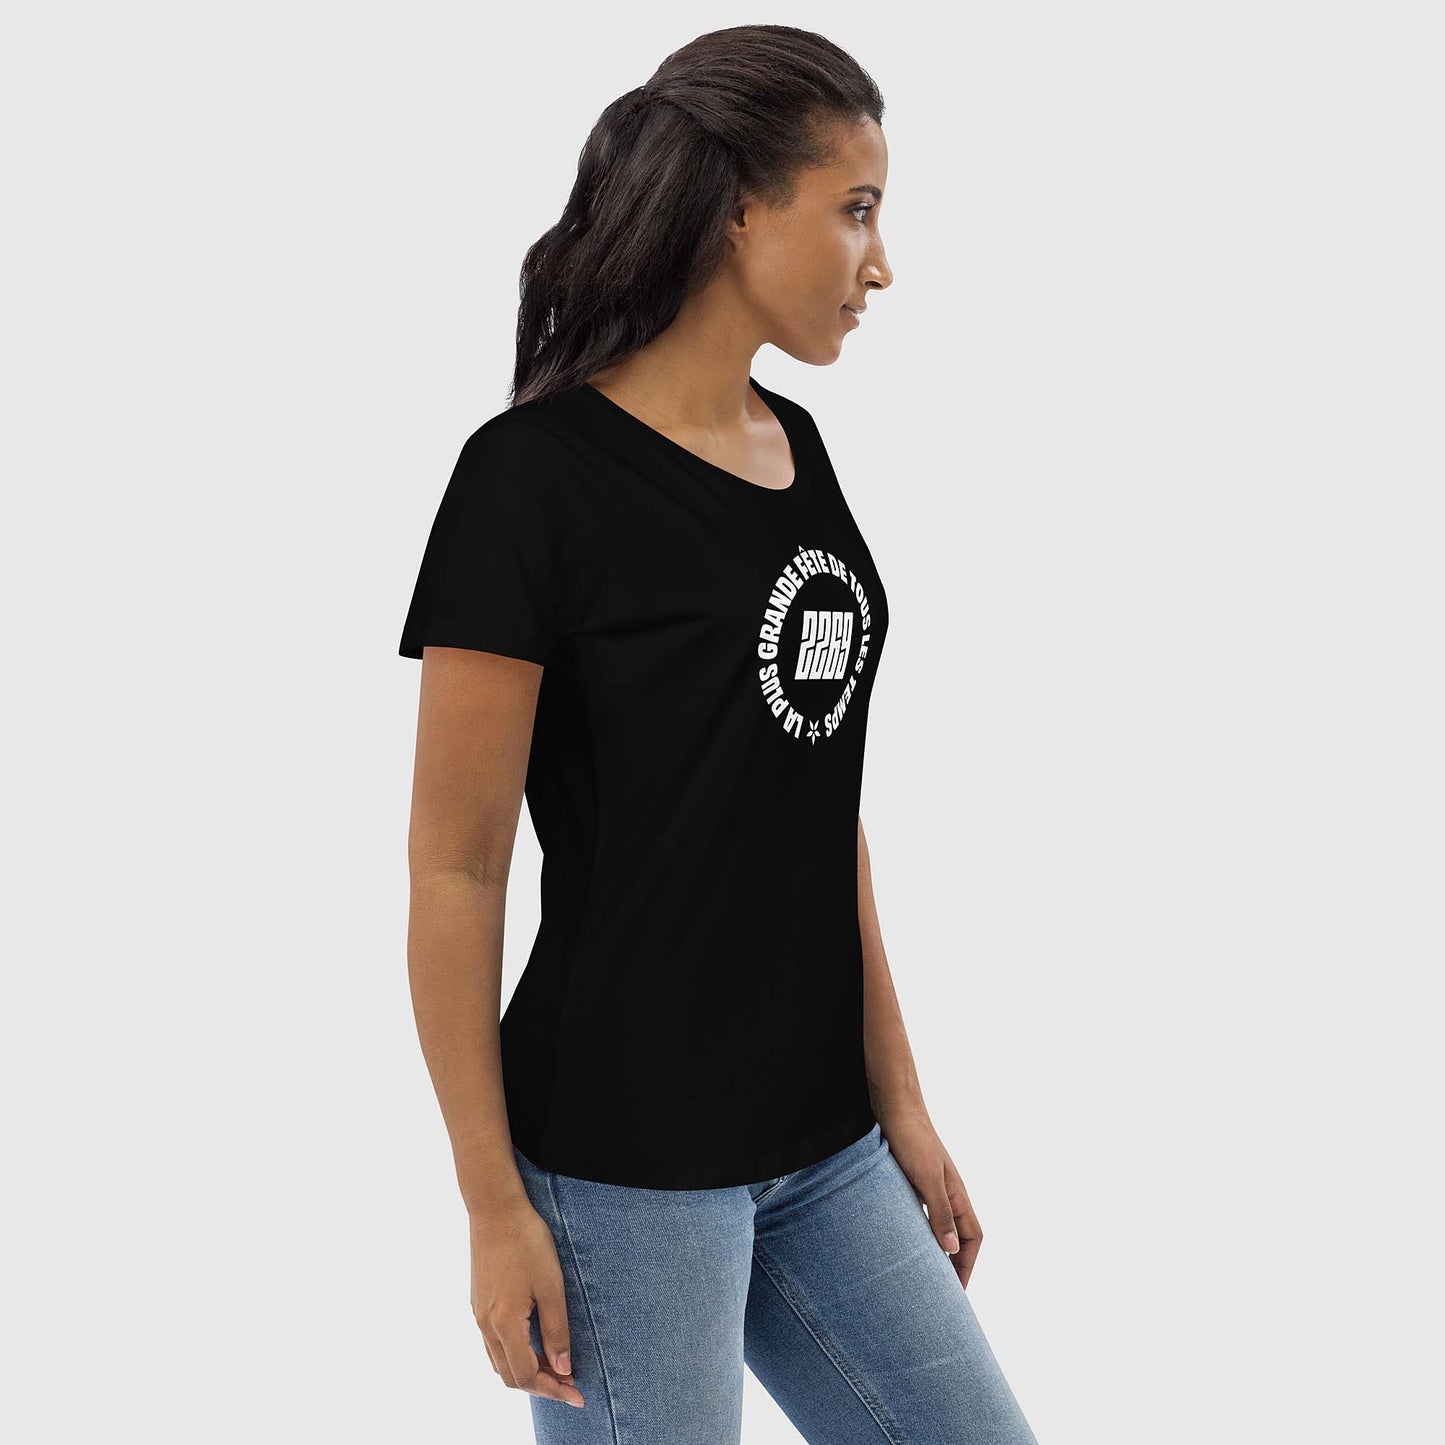 Women's black fitted organic cotton t-shirt with French 2269 party circle